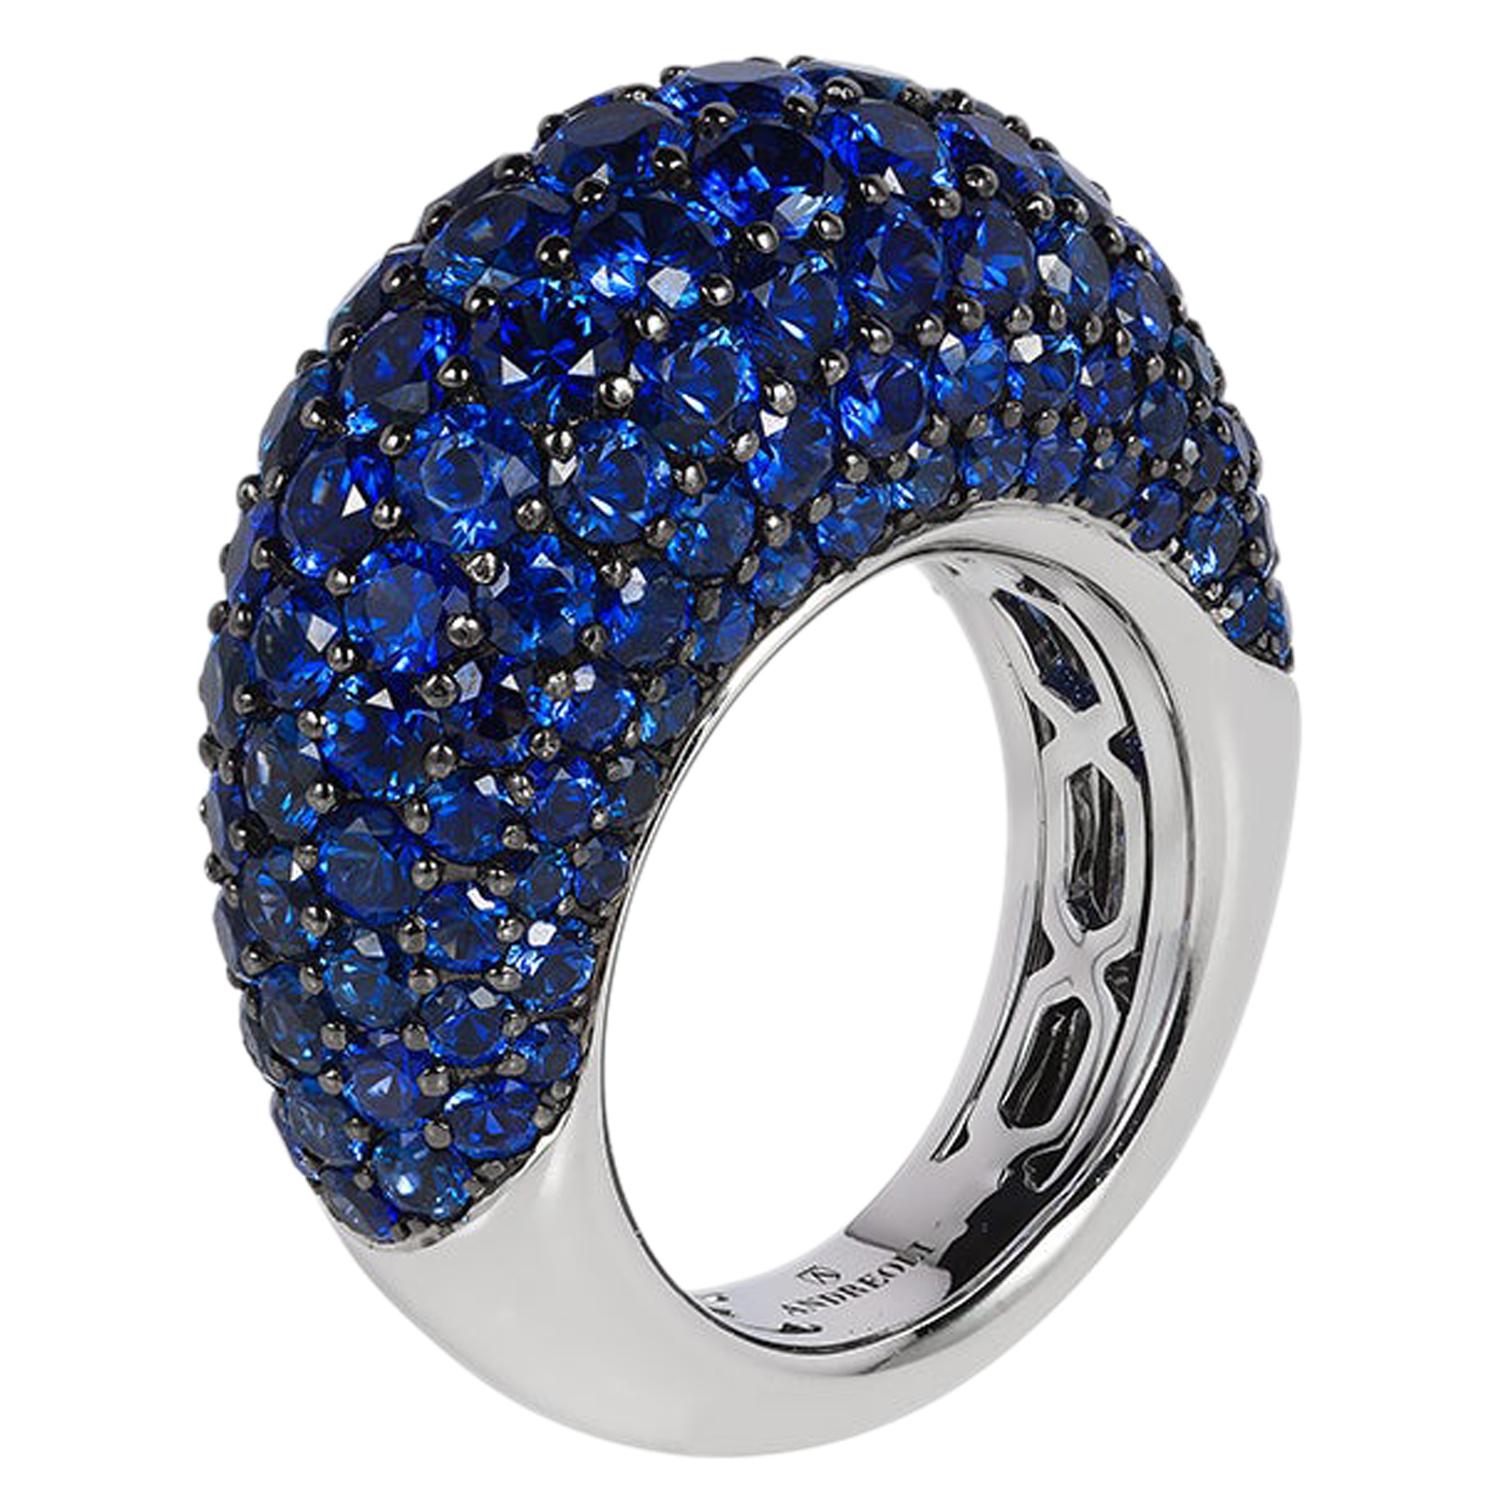 Blue Sapphire Dome Ring Cocktail 18 Karat White Gold Andreoli For Sale